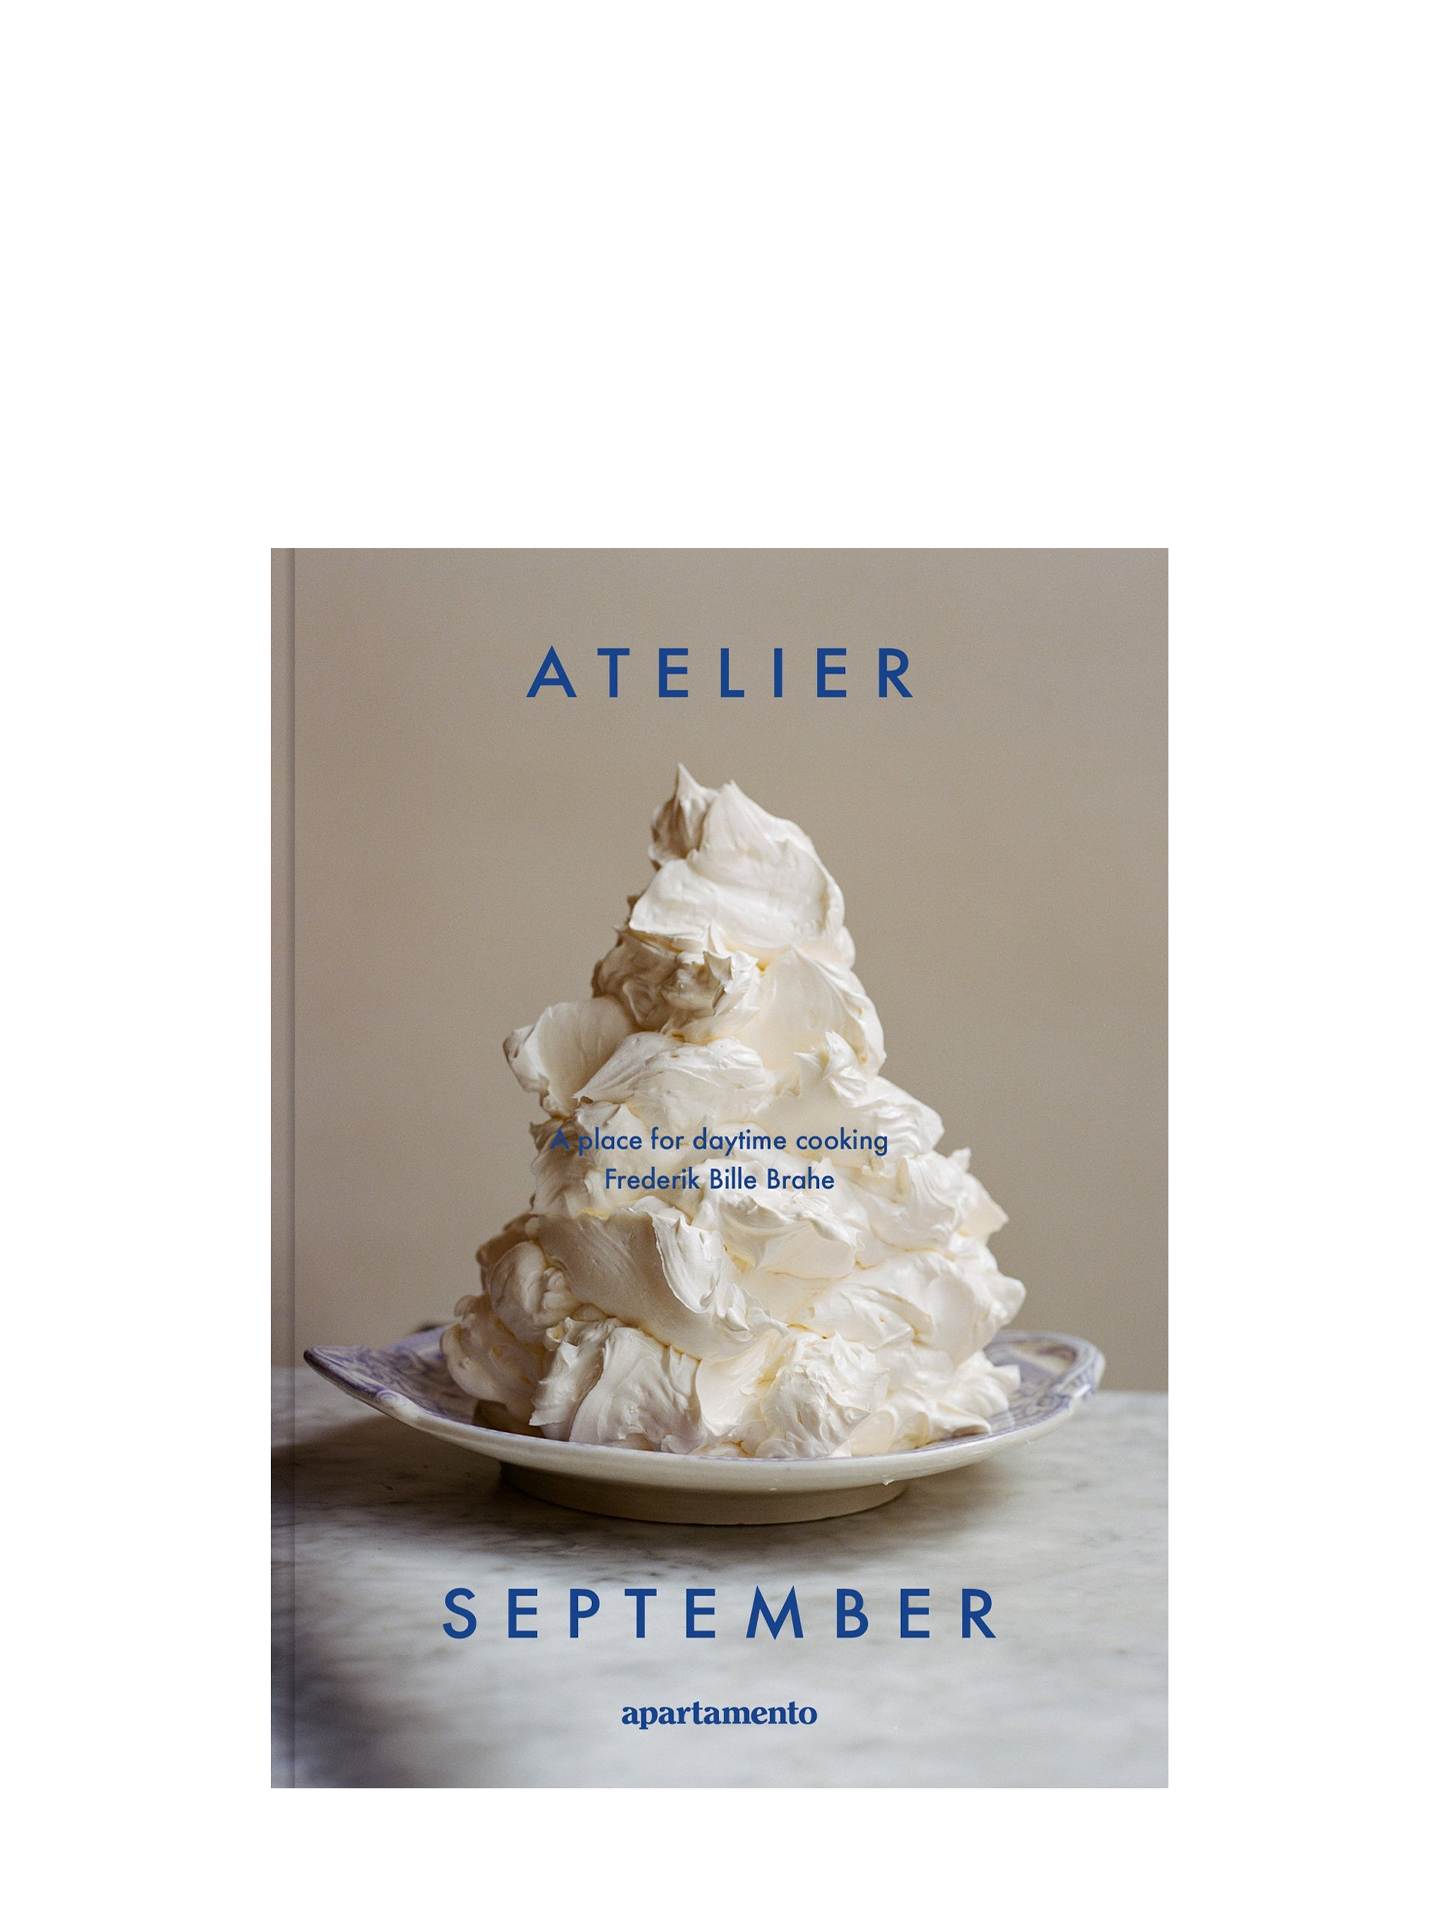 Atelier September – A place for daytime cooking